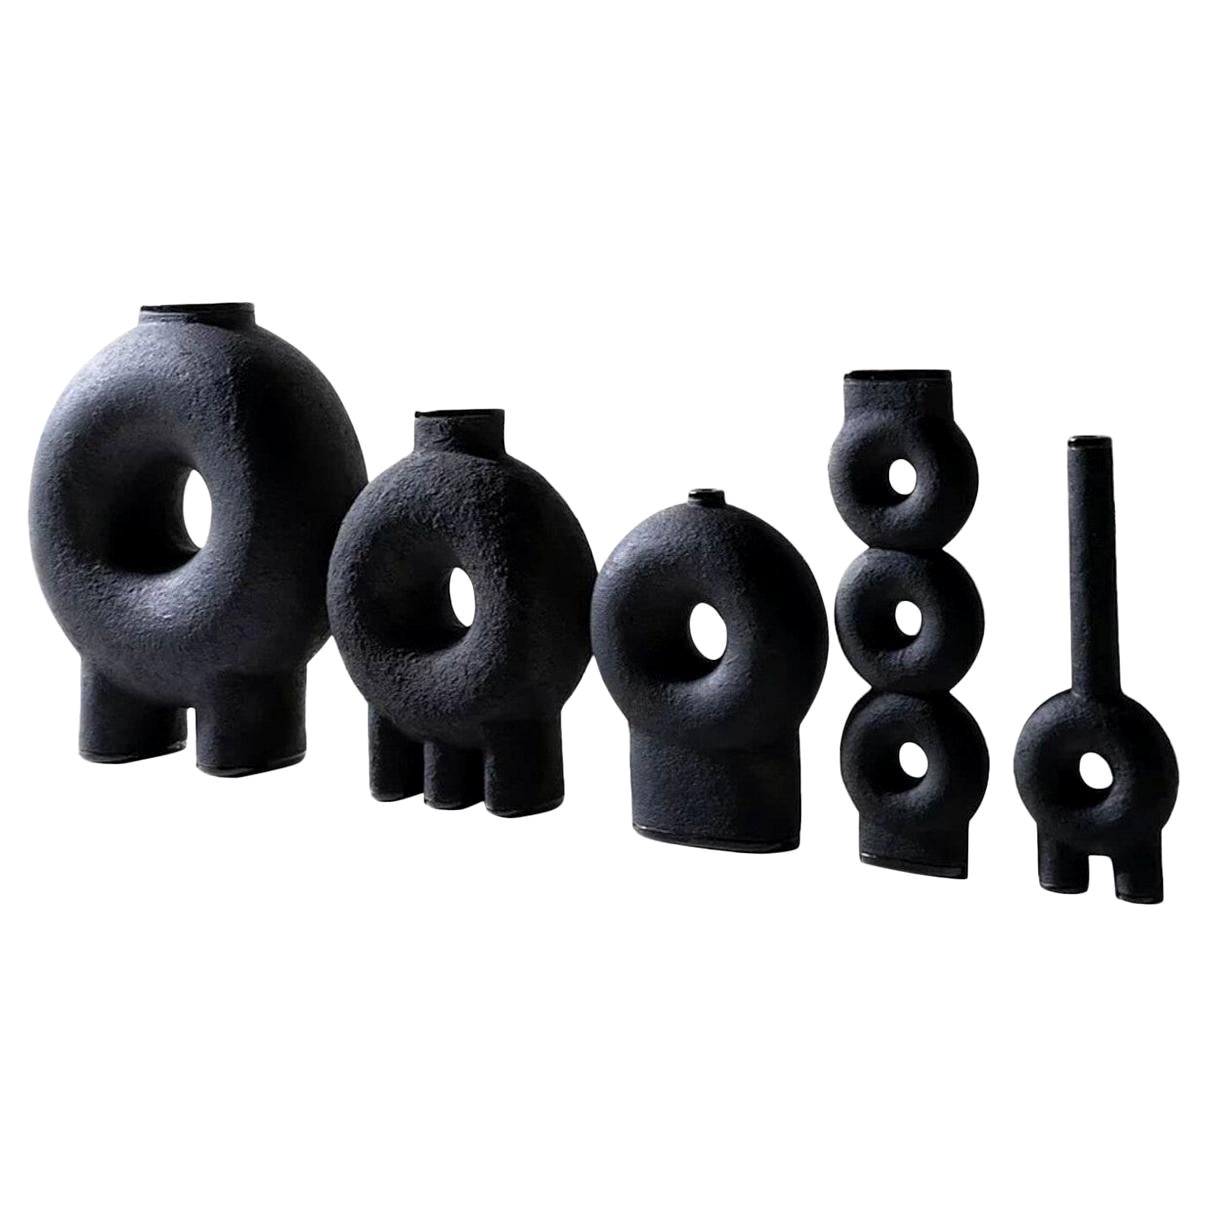 Ensemble of Sculpted Ceramic Vases by Faina For Sale